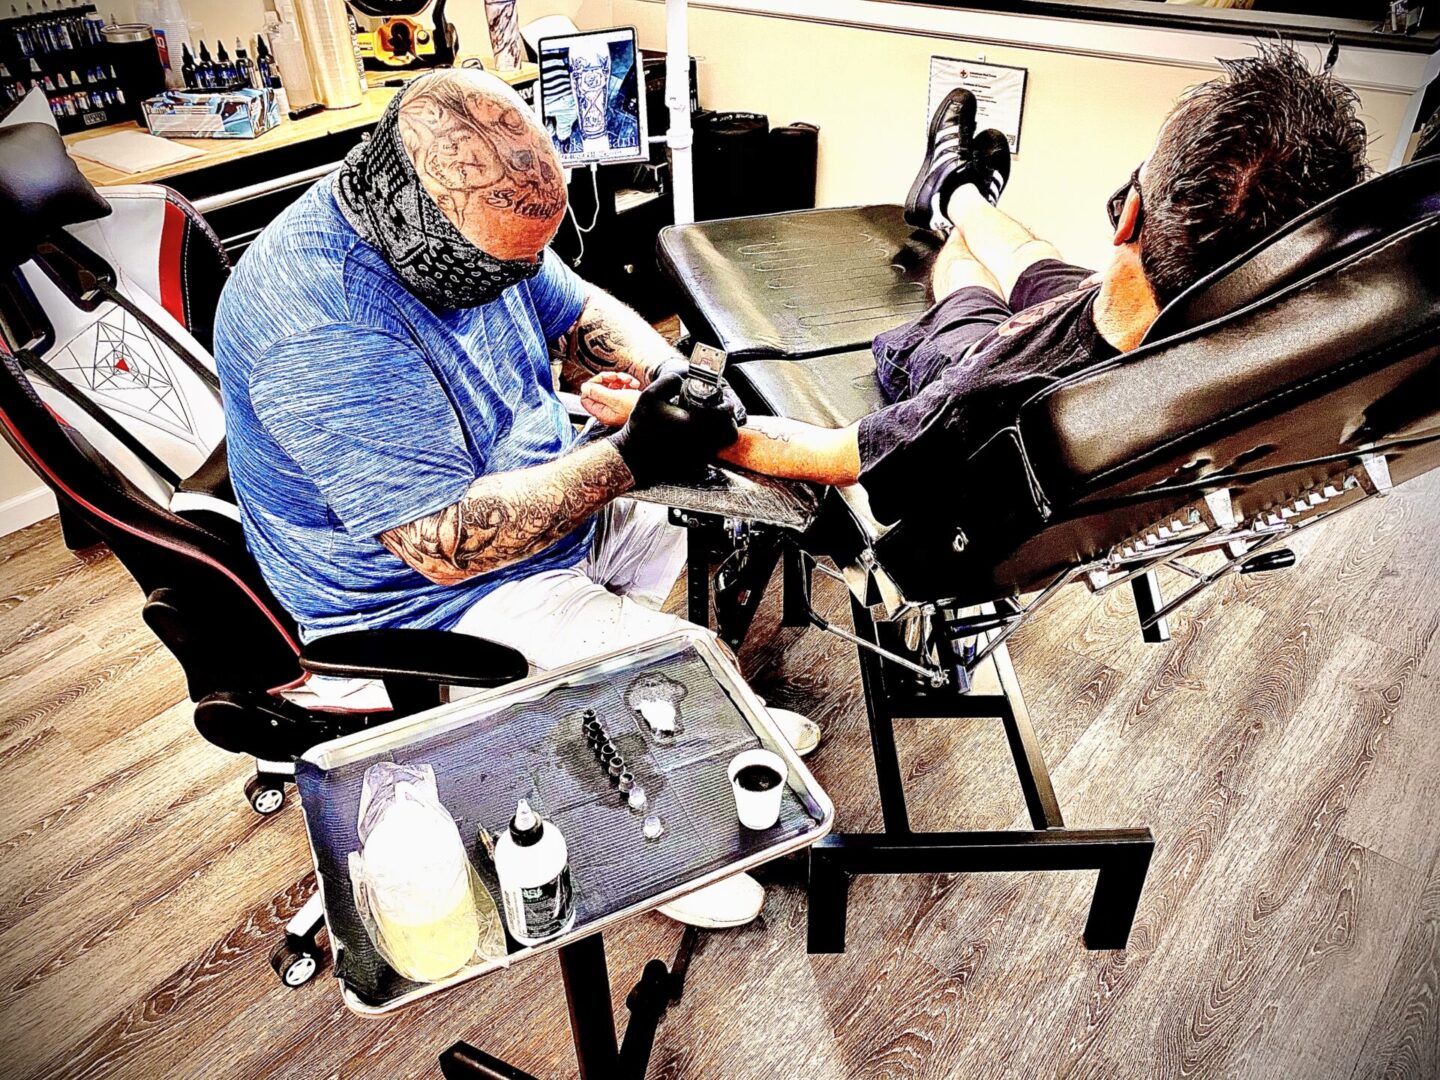 A man getting his tattoo done by another person.